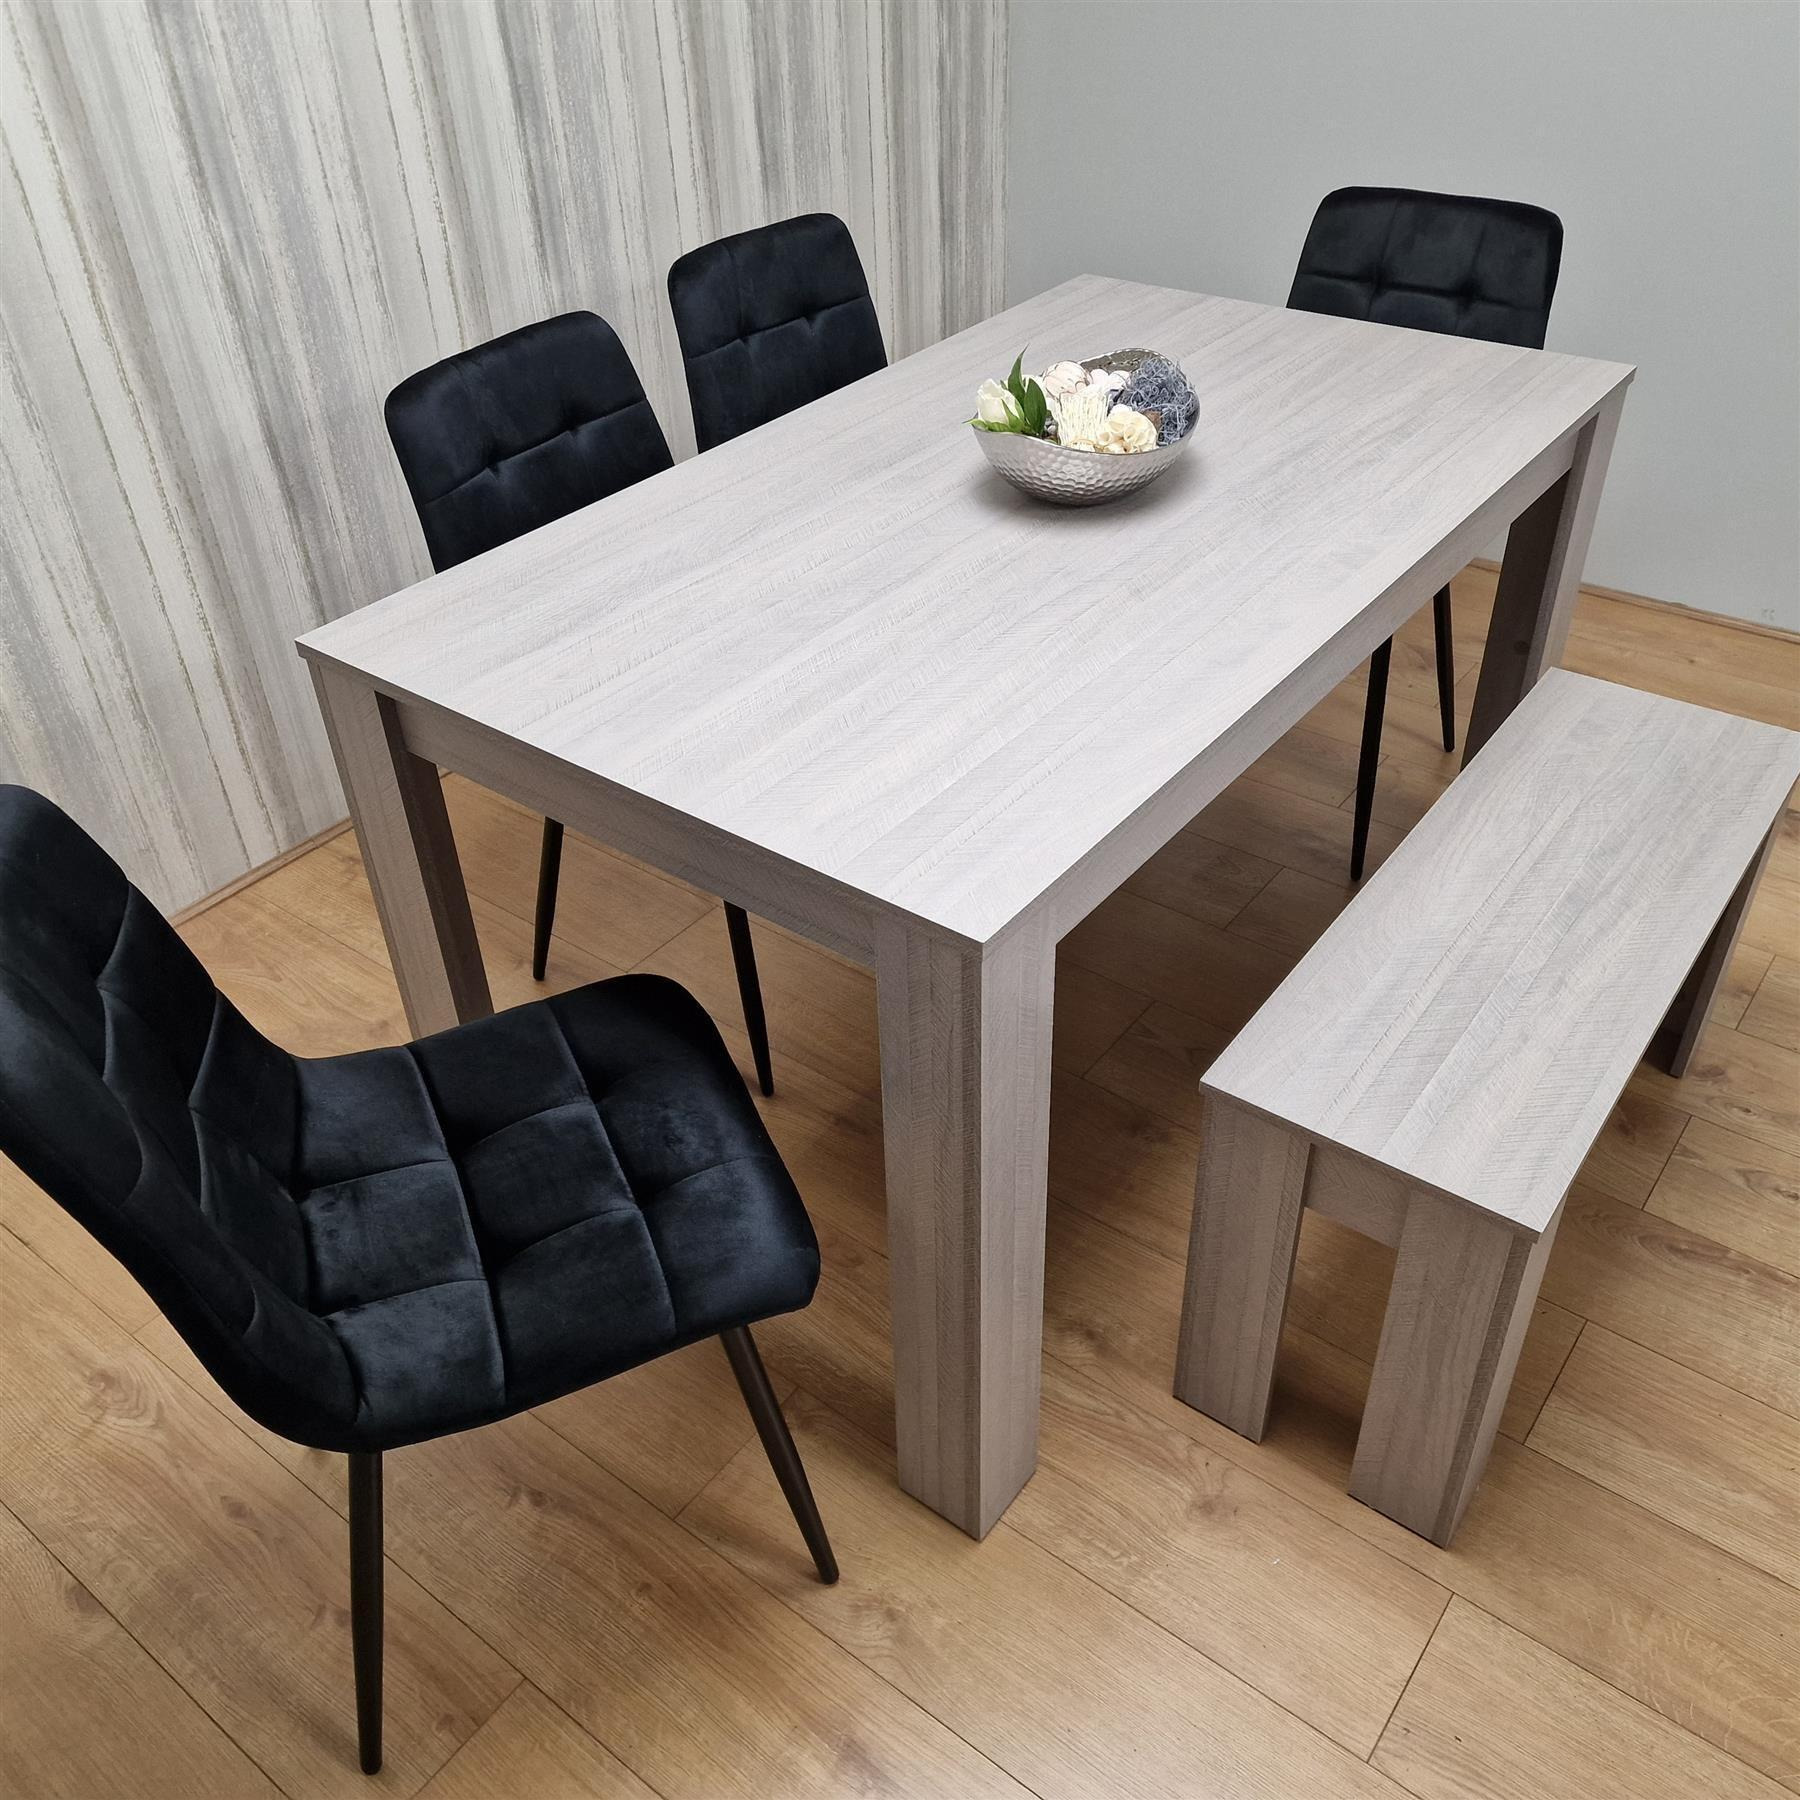 Dining Table Set with 4 Chairs Dining Room, Kitchen table set of 4, and Bench - image 1